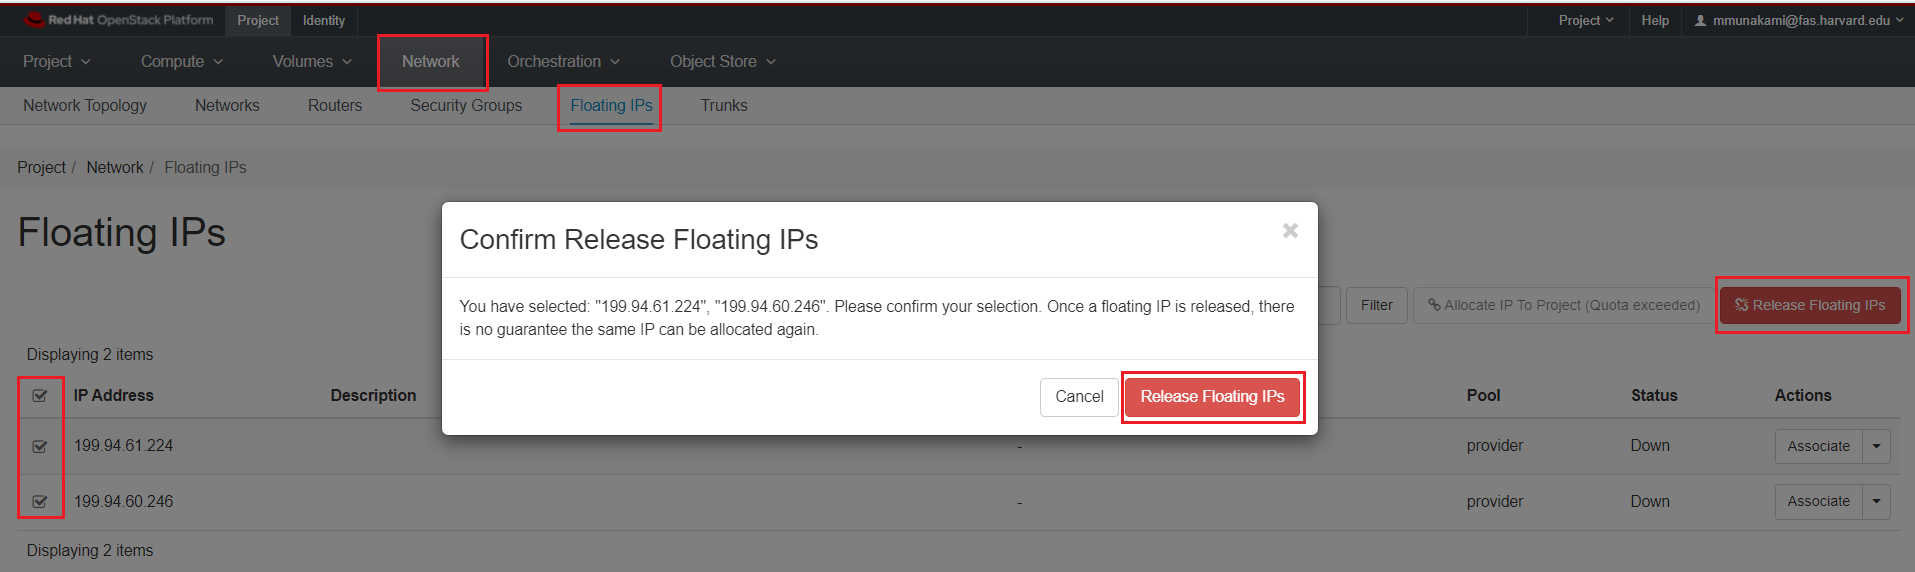 Release all Floating IPs